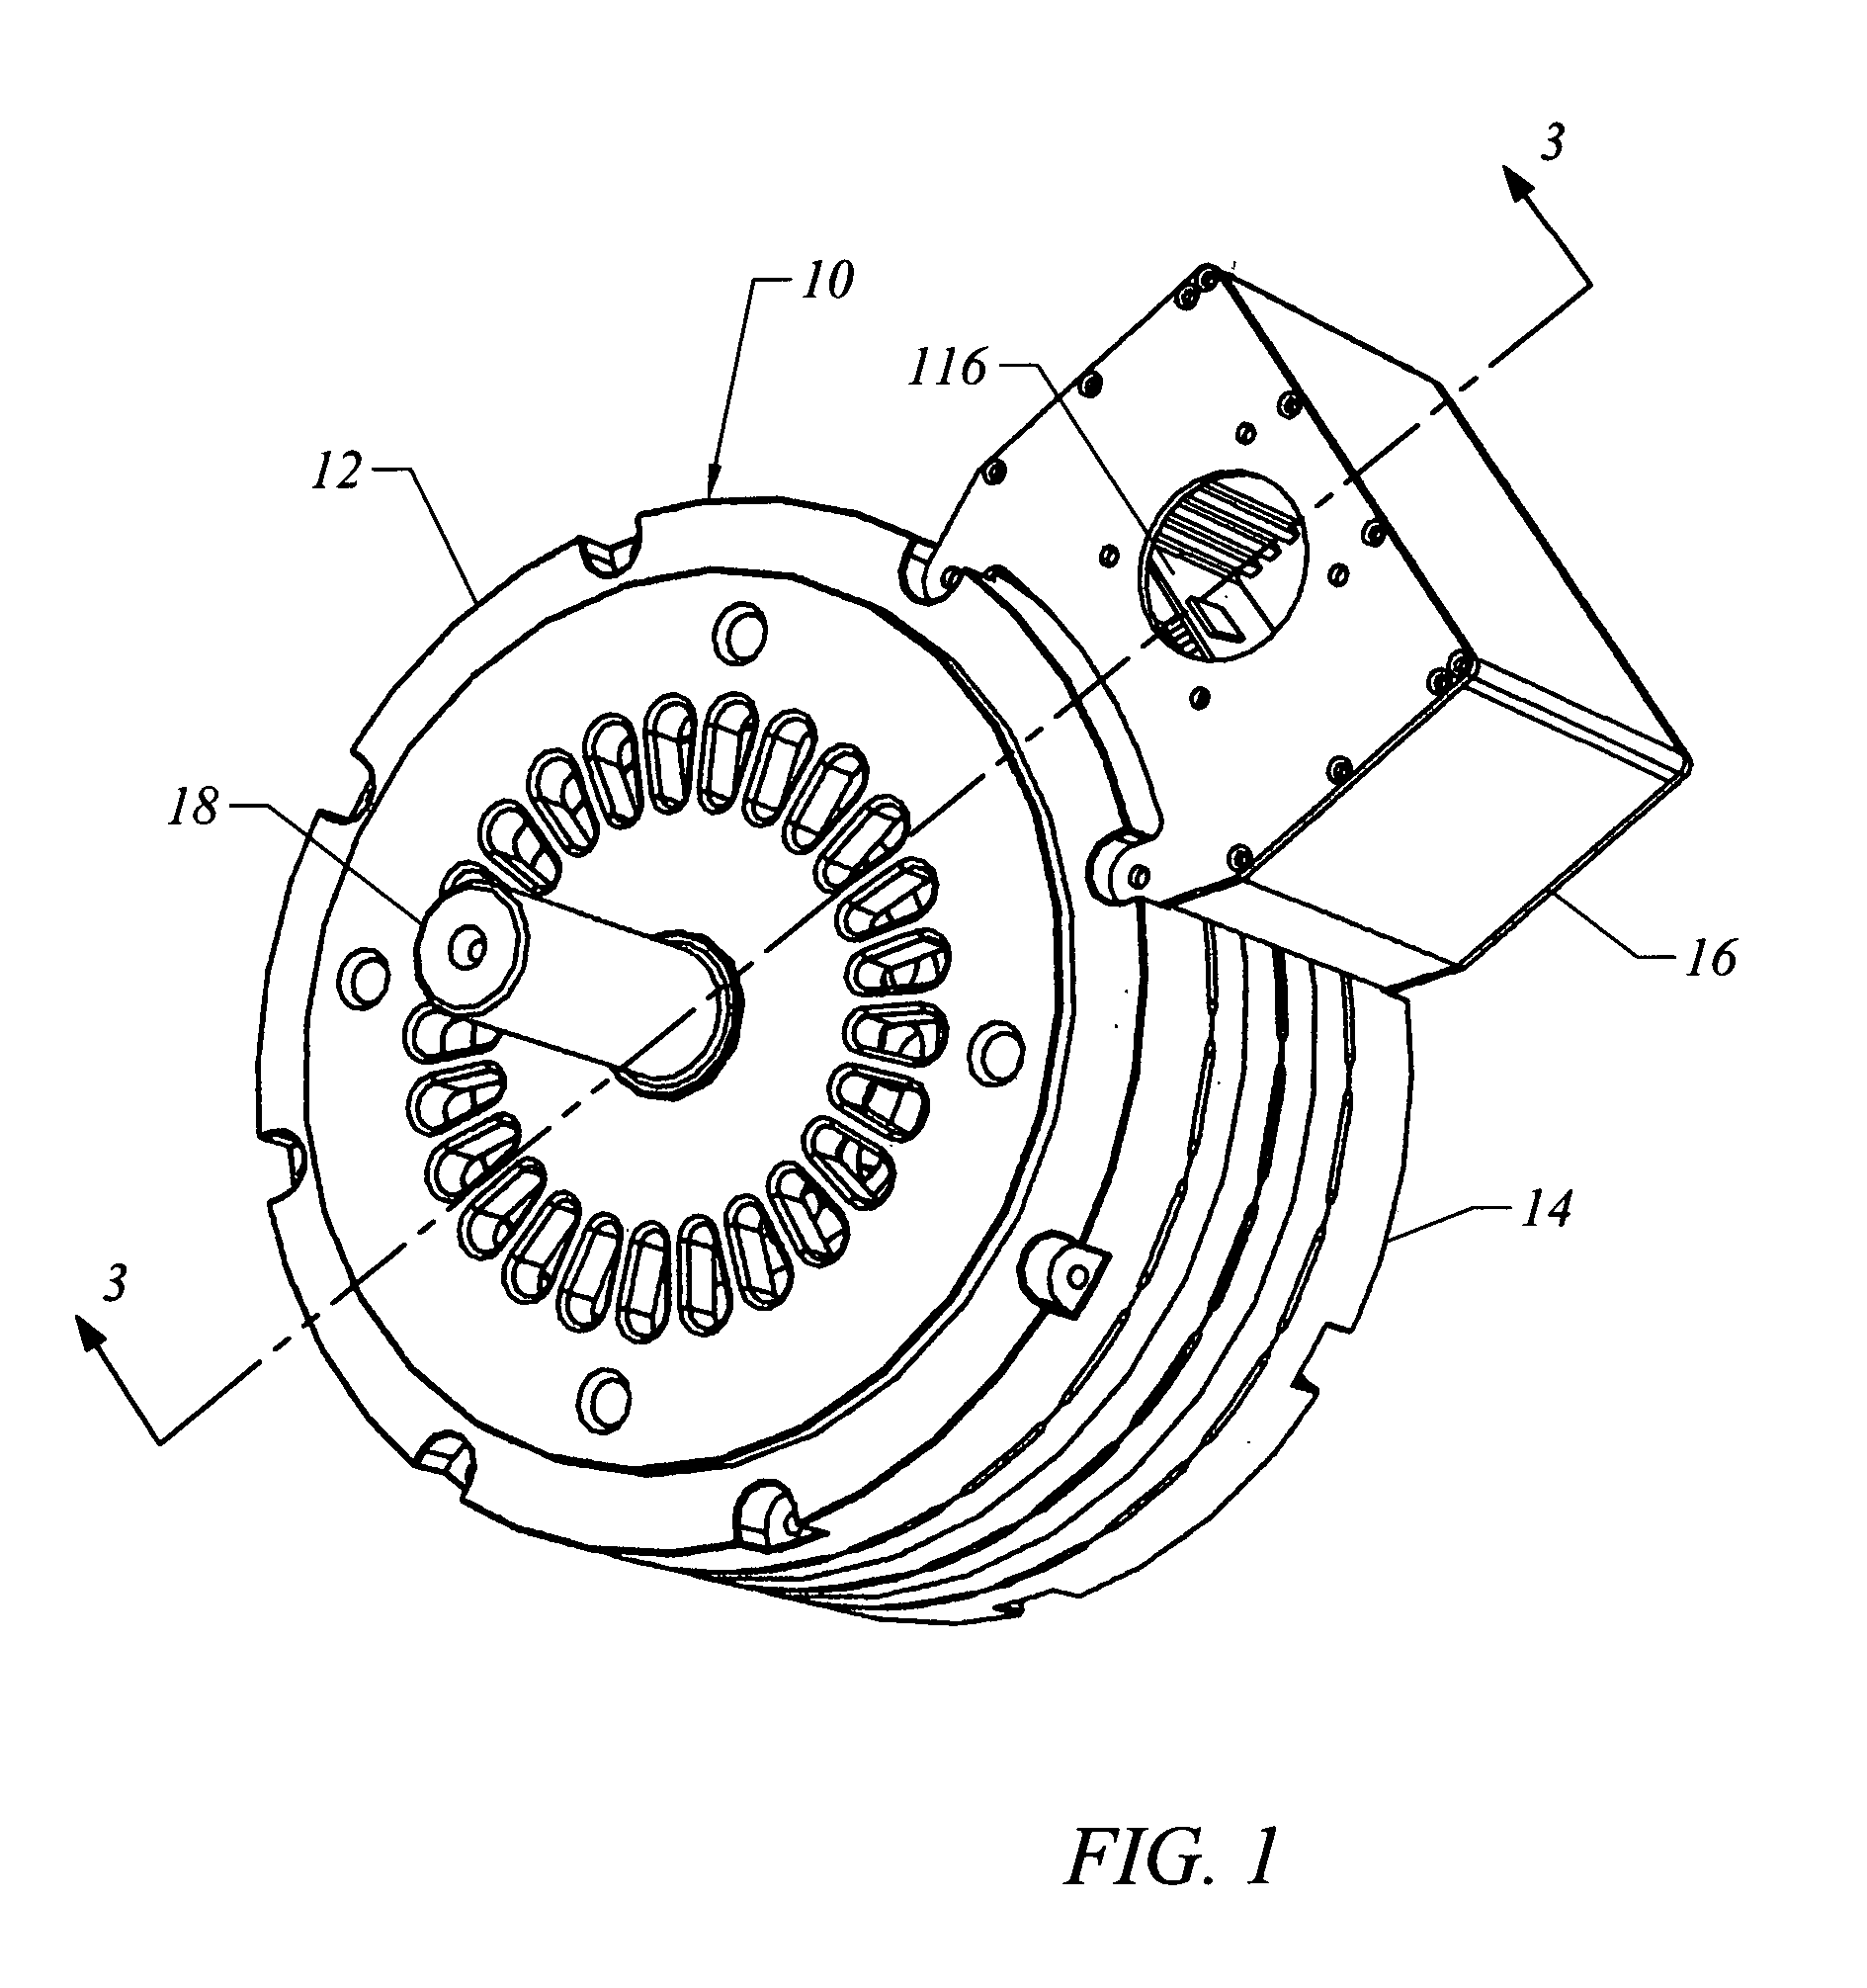 Optimized modular electrical machine using permanent magnets